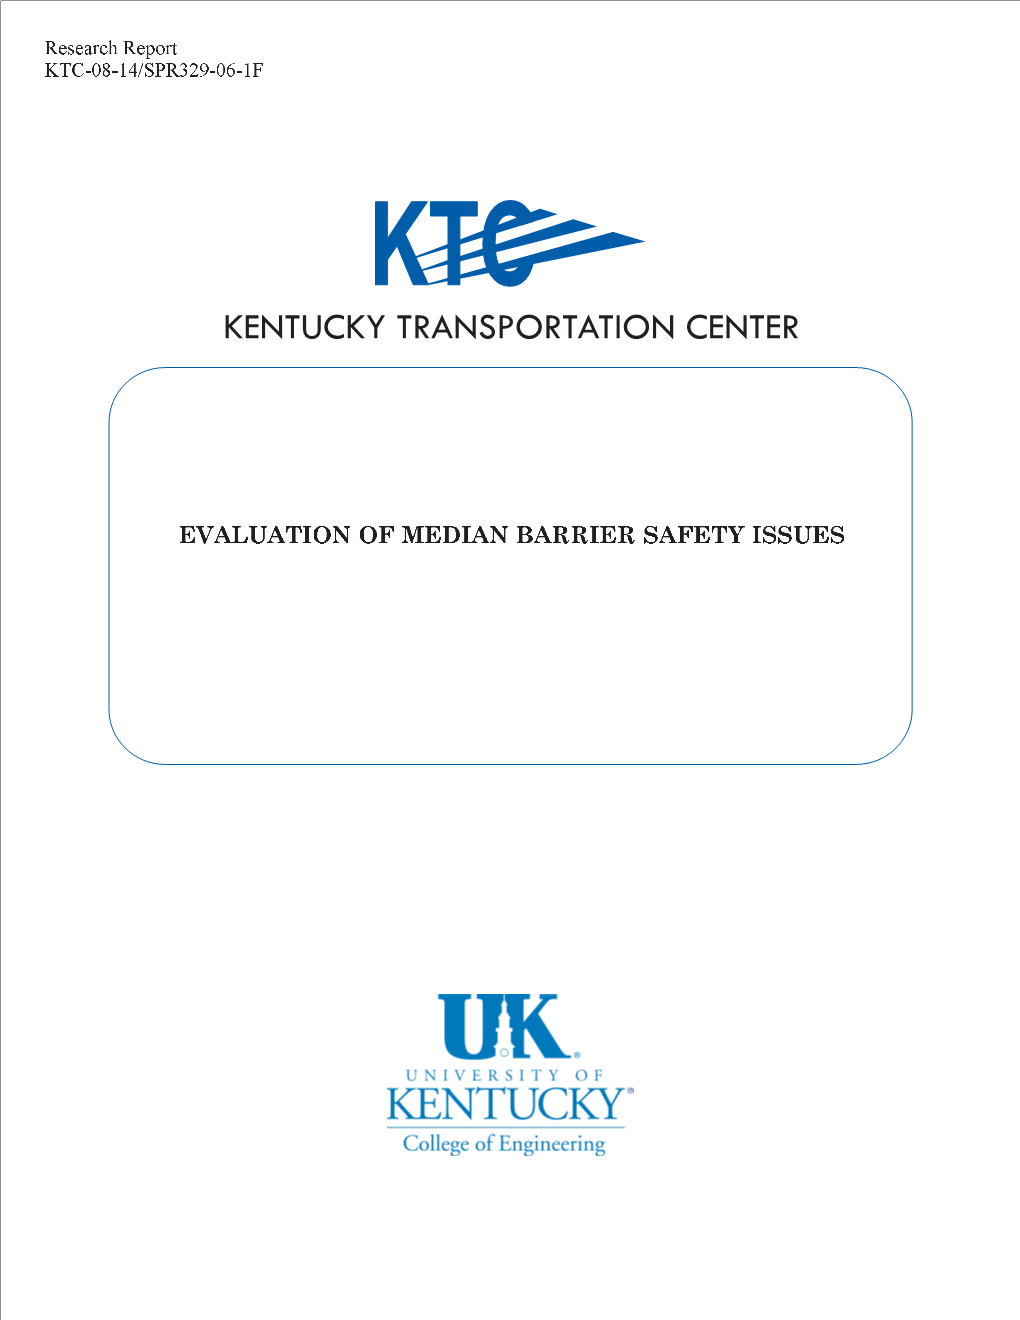 Evaluation of Median Barrier Safety Issues Our Mission